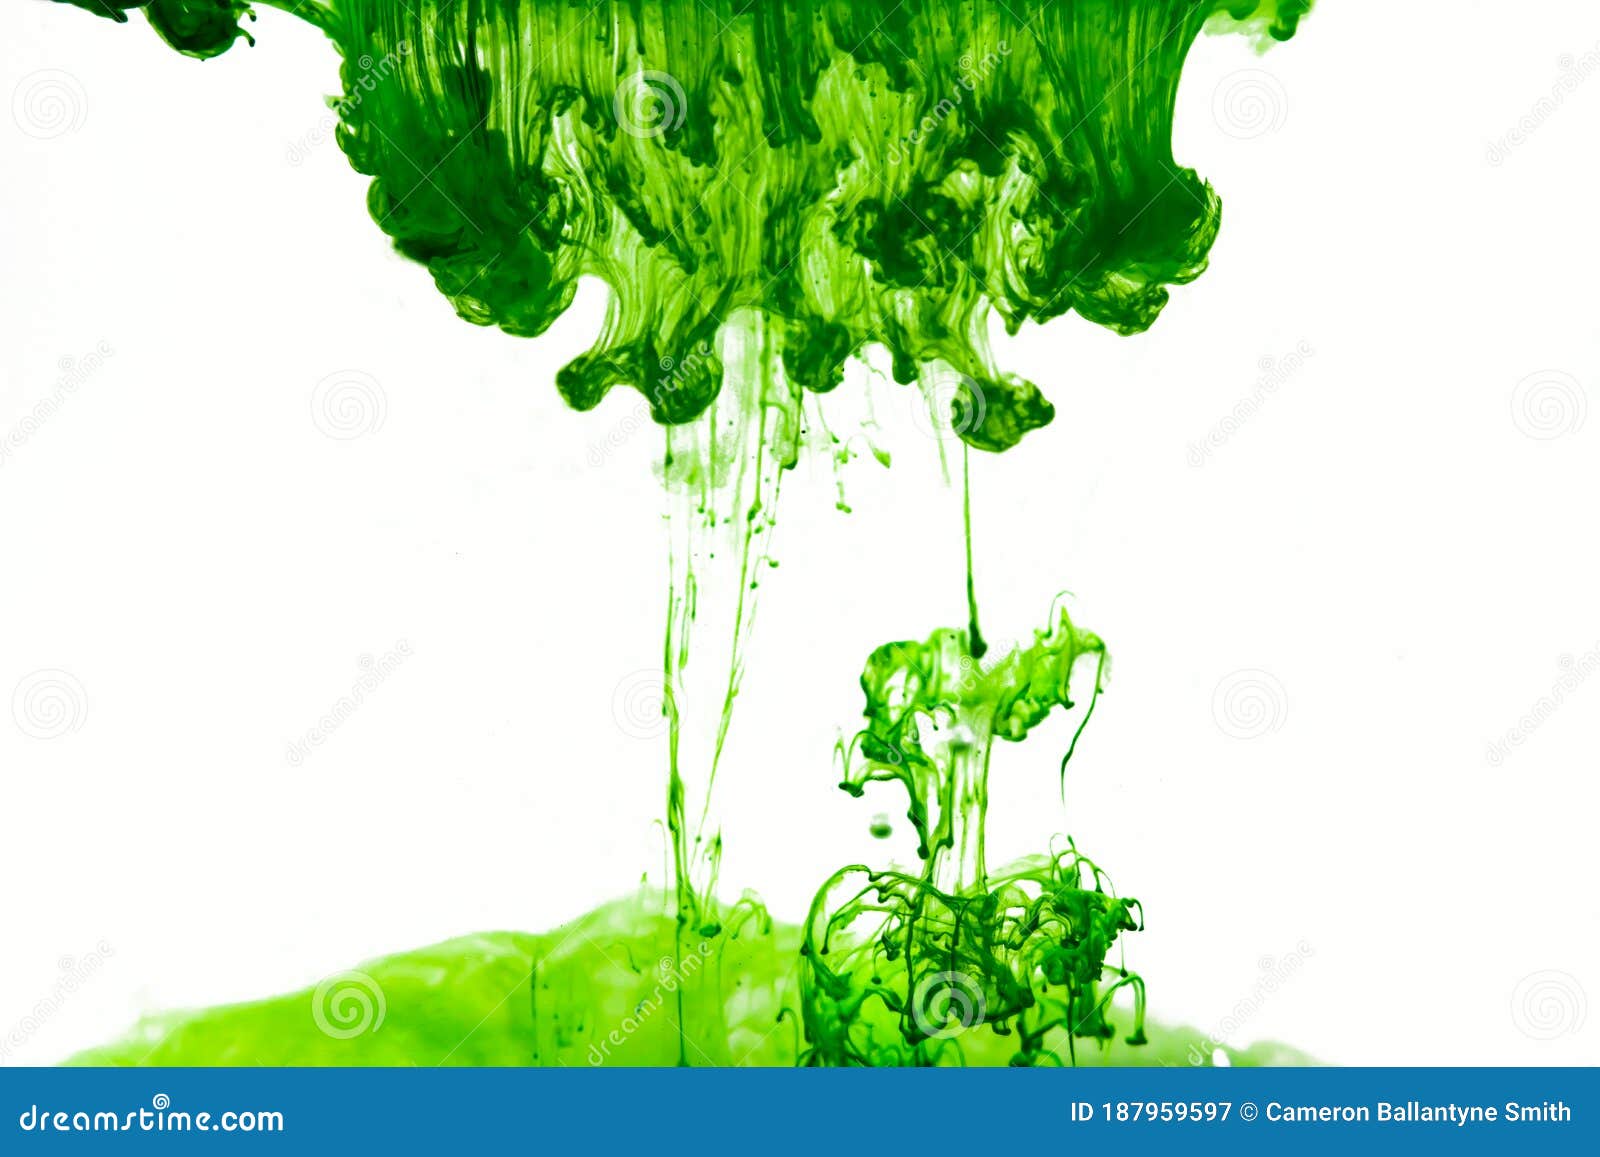 Green Ink in Water with White Background Stock Image - Image of motion ...